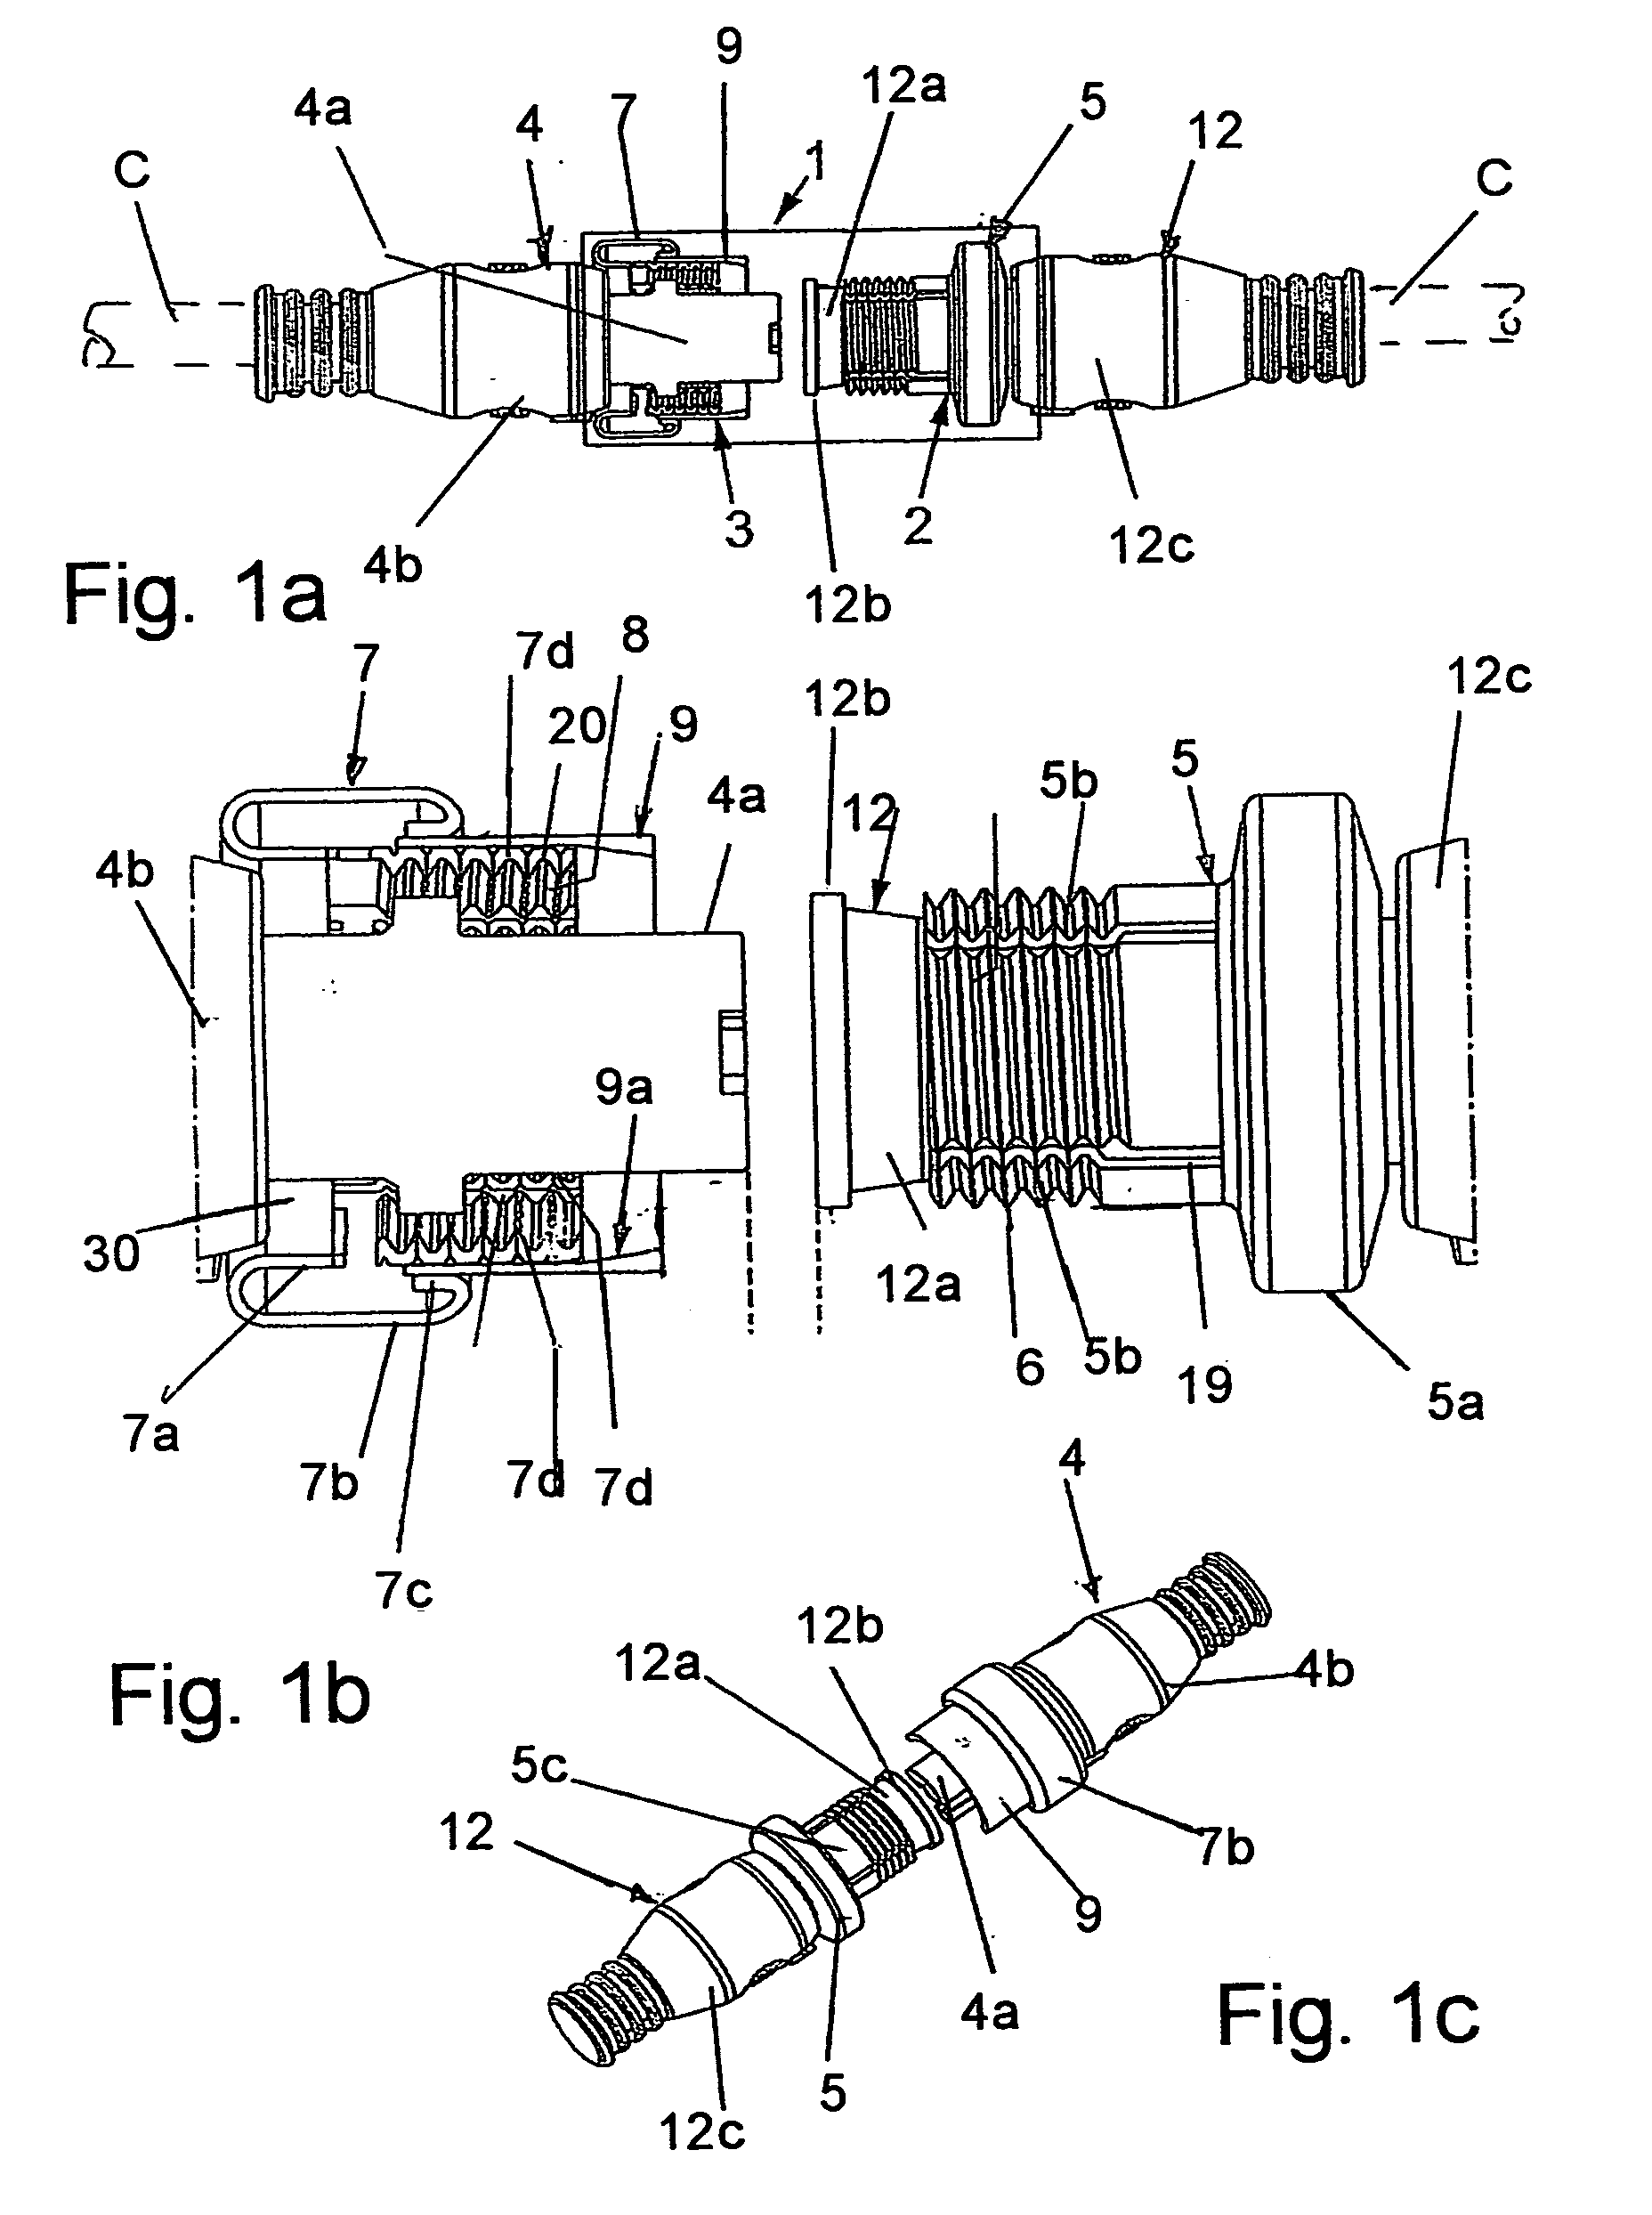 Connector for electrical and optical cables